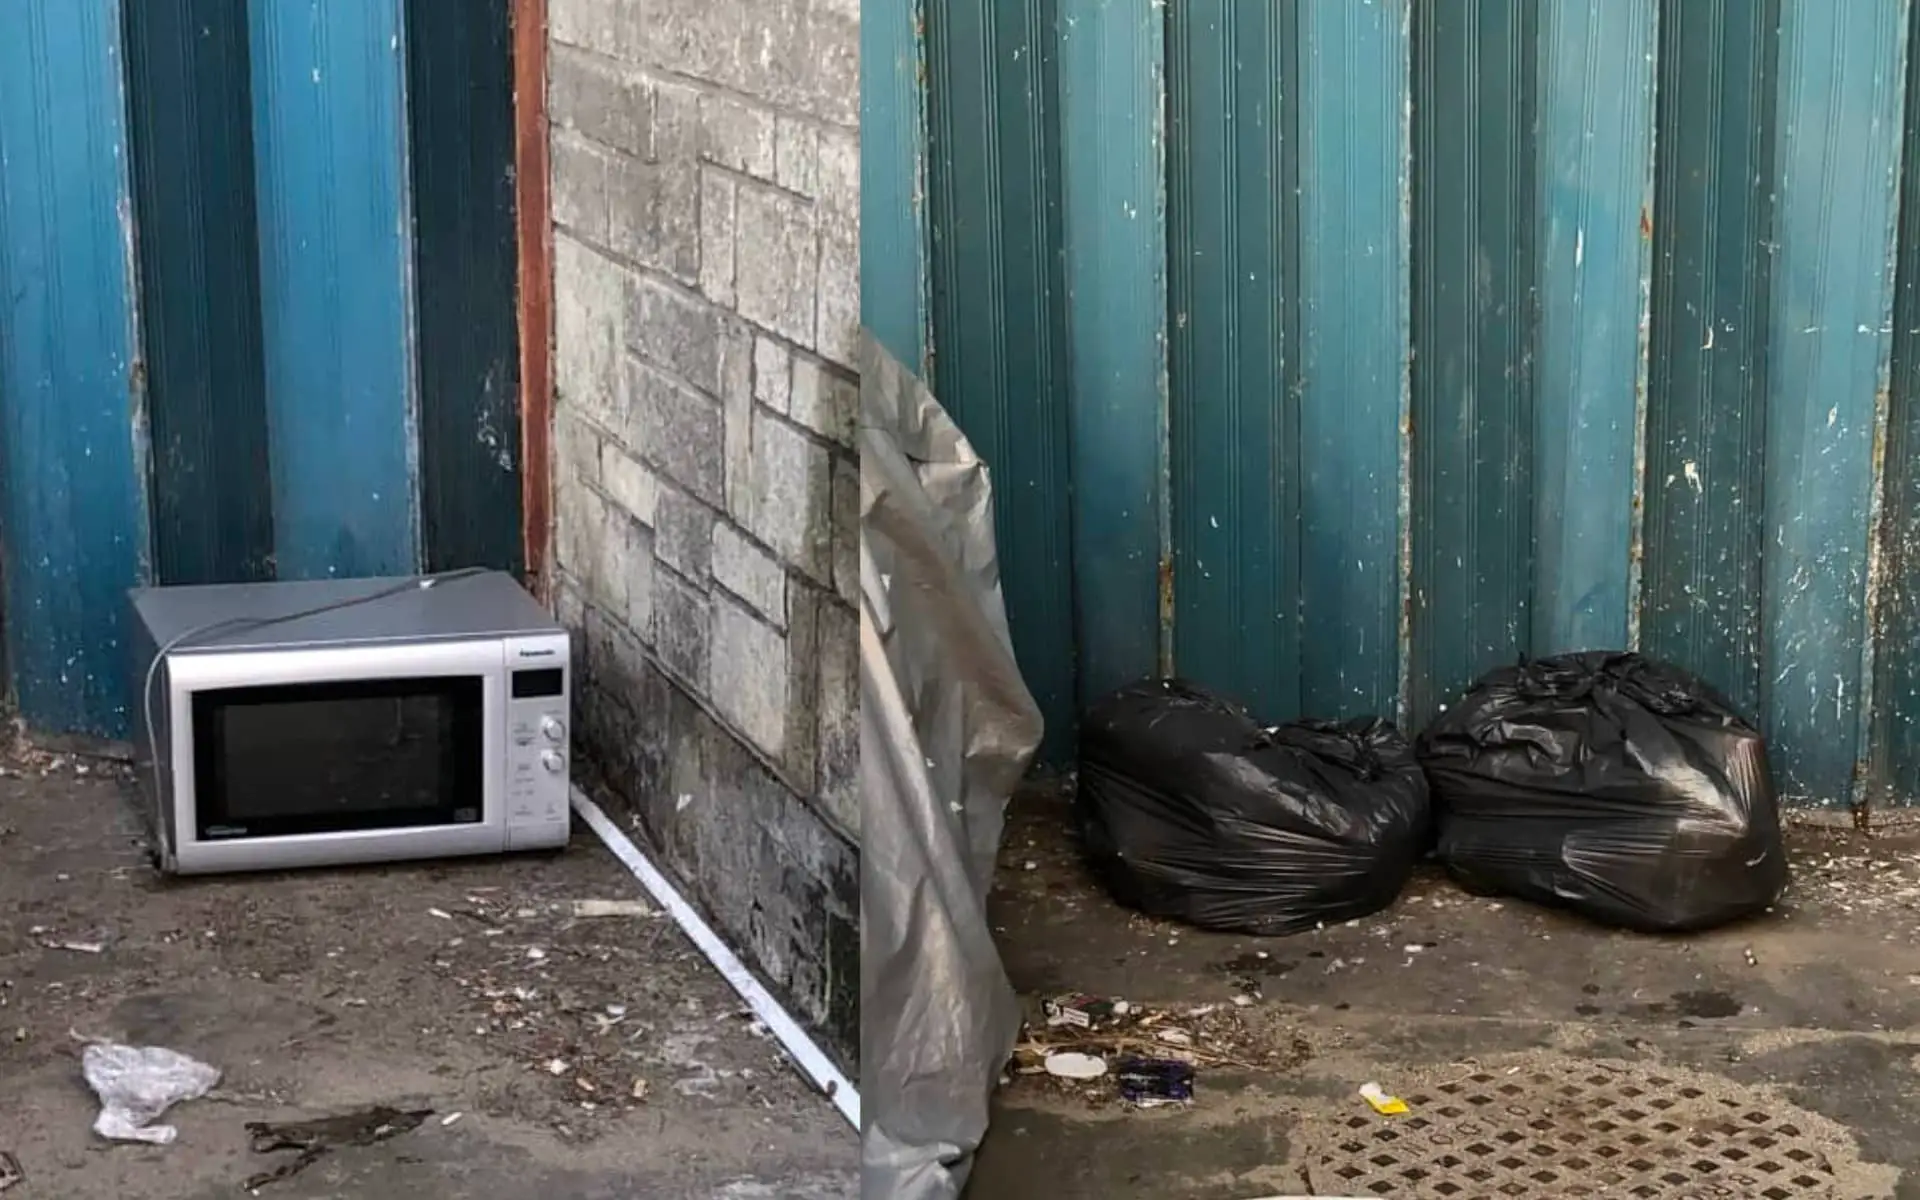 Fly tipping at Ventnor Bus Station